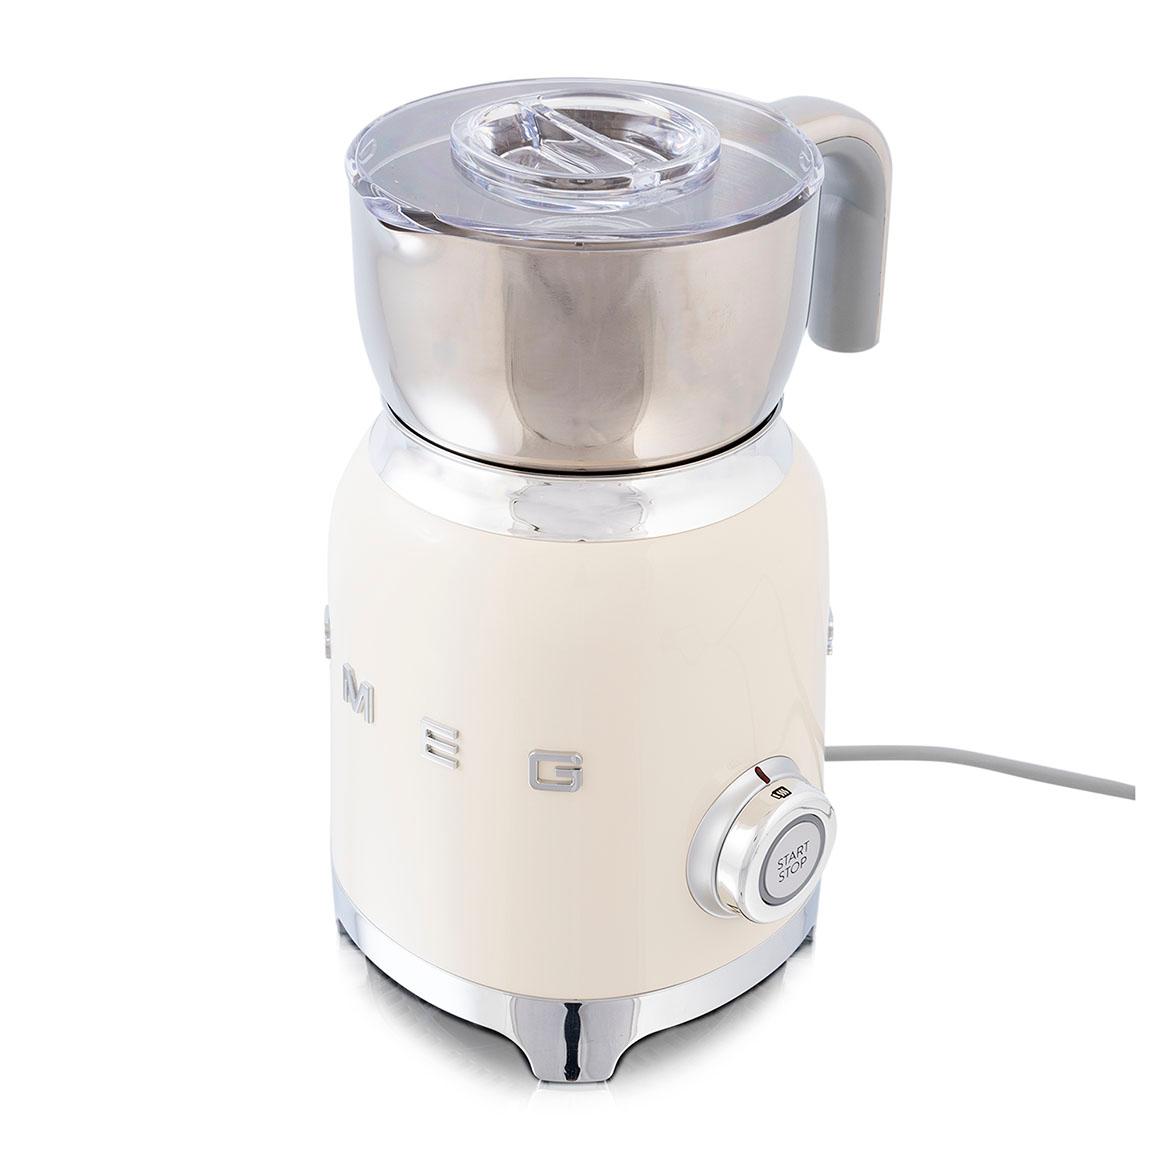 Features & functions of the Smeg Milk Frother, MFF01